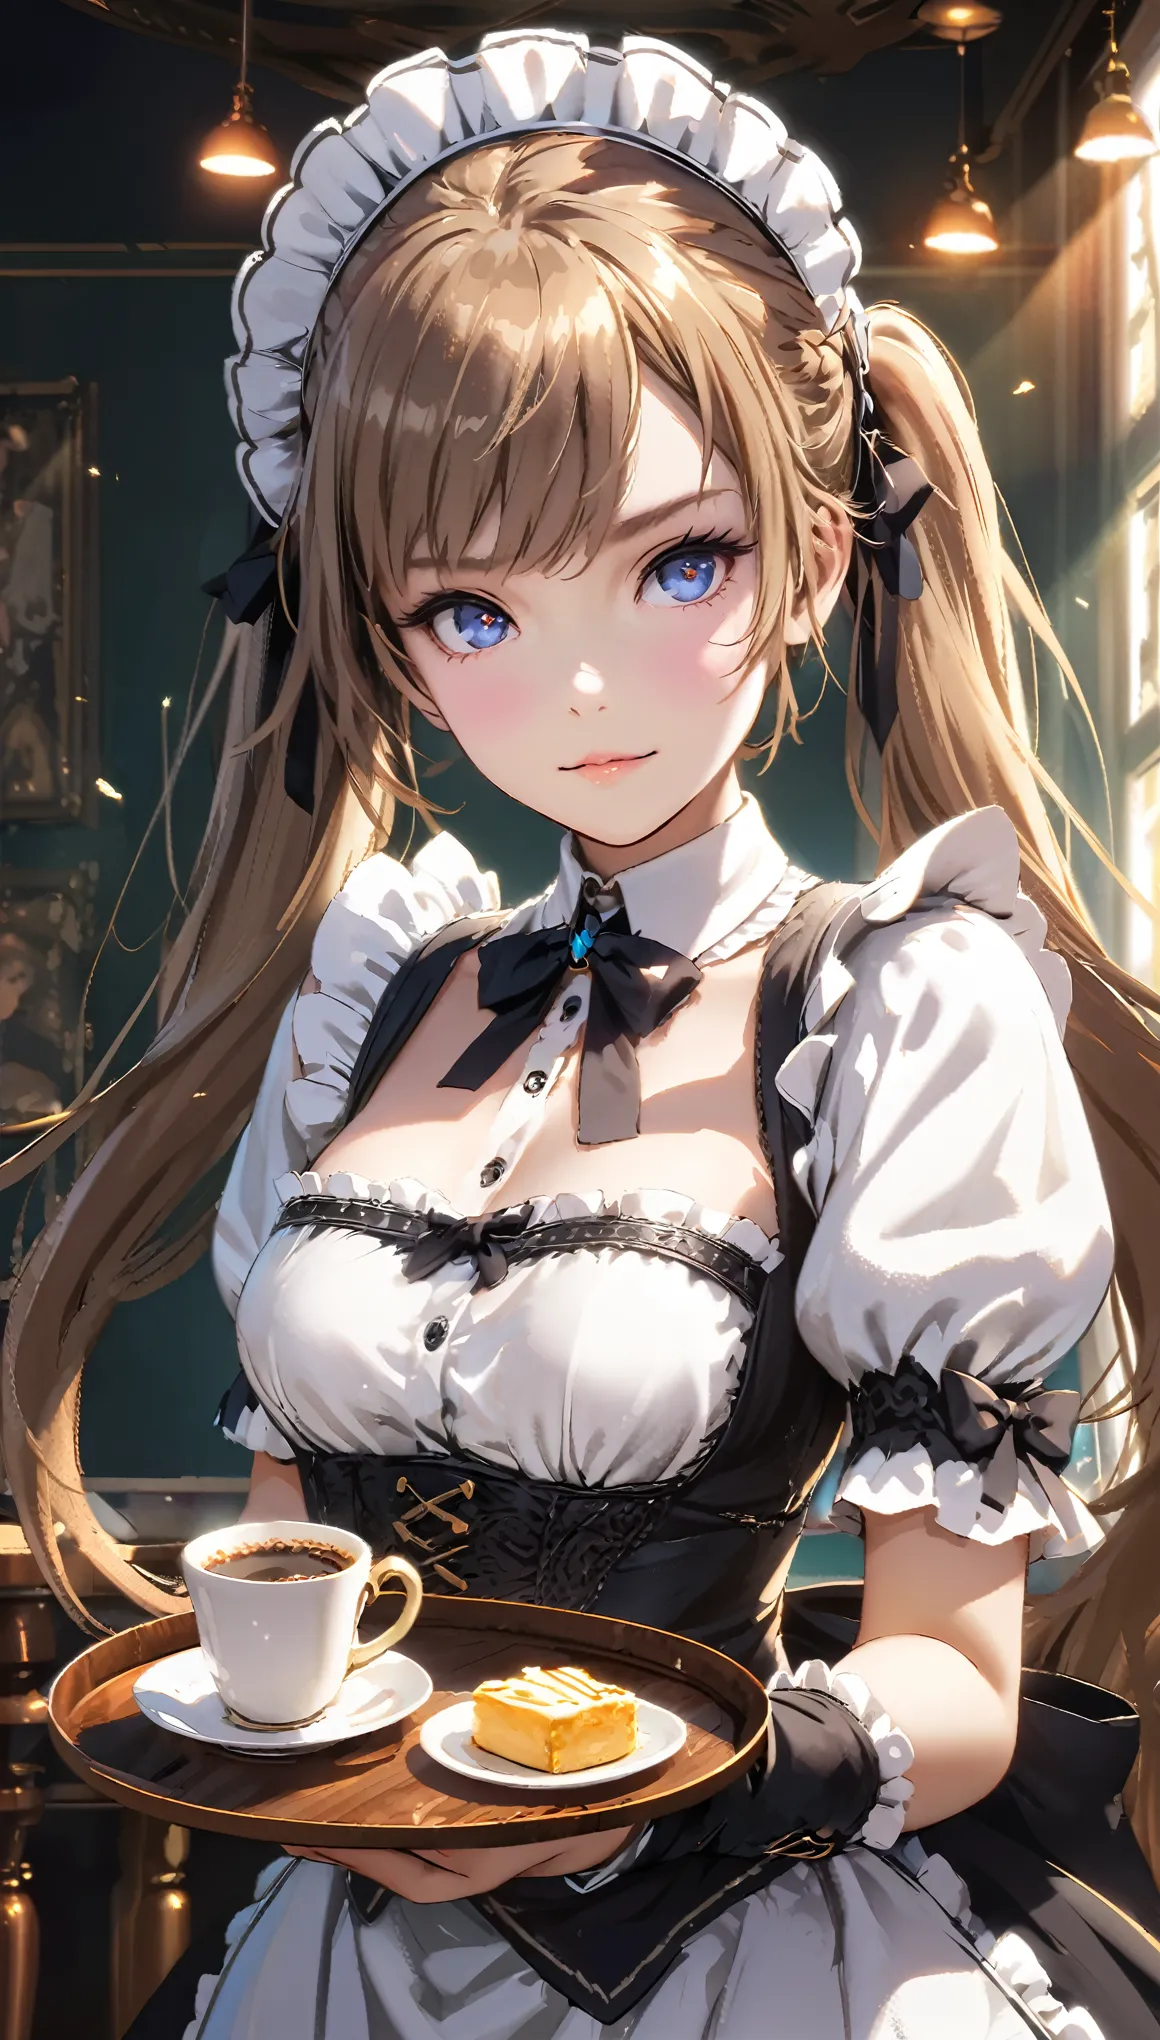 (masterpiece, High resolution,Super detailed:1.0),1 girl,Young and beautiful woman,Eyes staring at the camera,Perfect female body, Blushing lightly and smiling,Highly detailed CG,unity 8k wallpaper，Intricate details, The only person, (Twin-tailed brown hair,Maid clothes,Serious expression,Tray in hand),have coffee on the tray,Cafe, Terrace seats,Gothic style,Portraiture,Color Difference, Depth of written boundary,Dramatic Shadows, Ray Tracing, highest quality, Cinema Lighting,Official Art,
